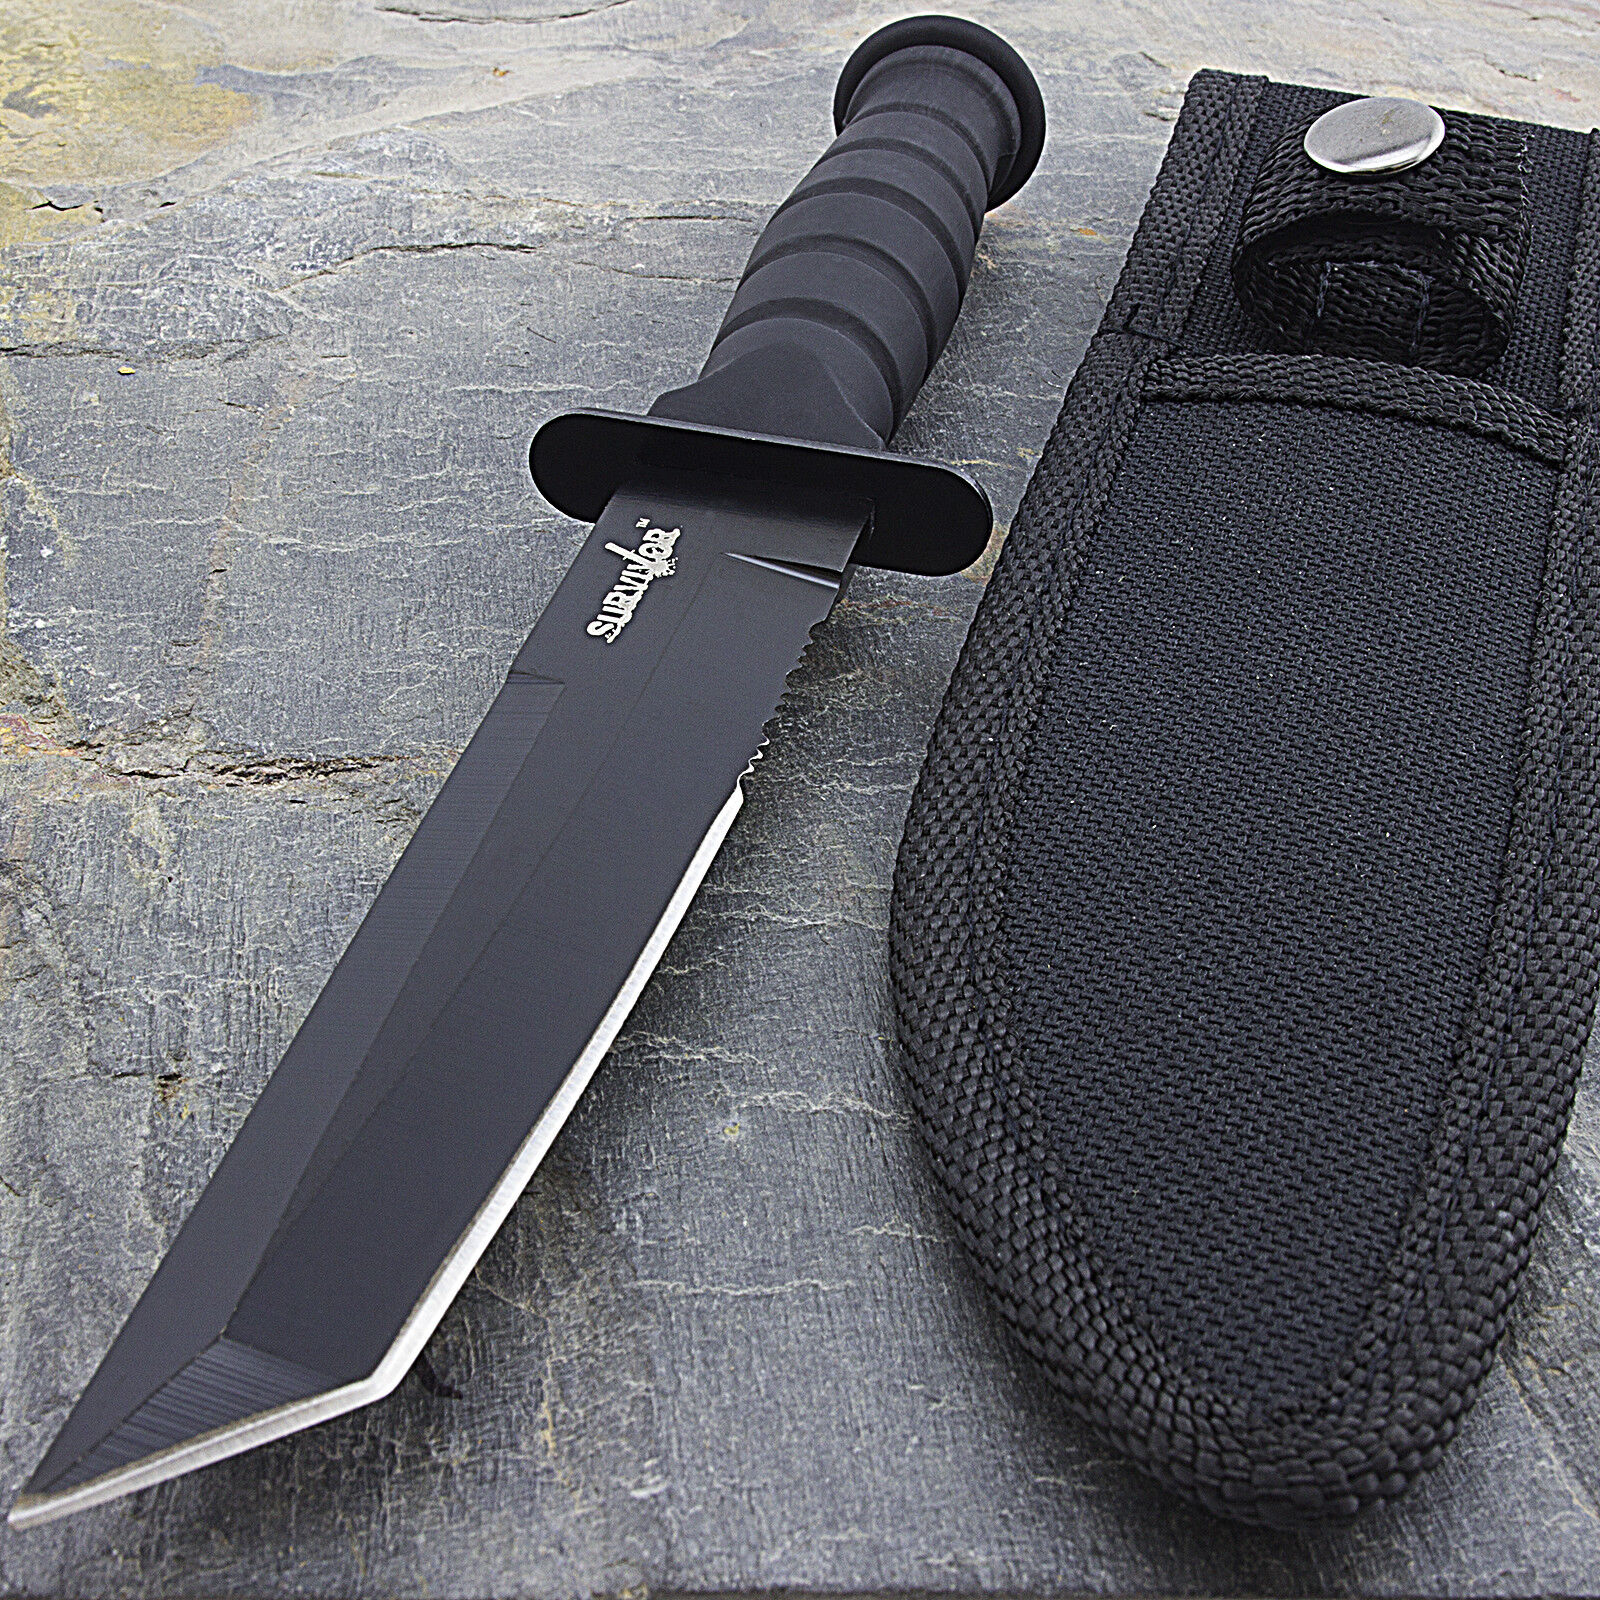 7.5" MILITARY TACTICAL TANTO COMBAT KNIFE w/ SHEATH Survival Hunting Fixed Blade Survivor HK-1023TN